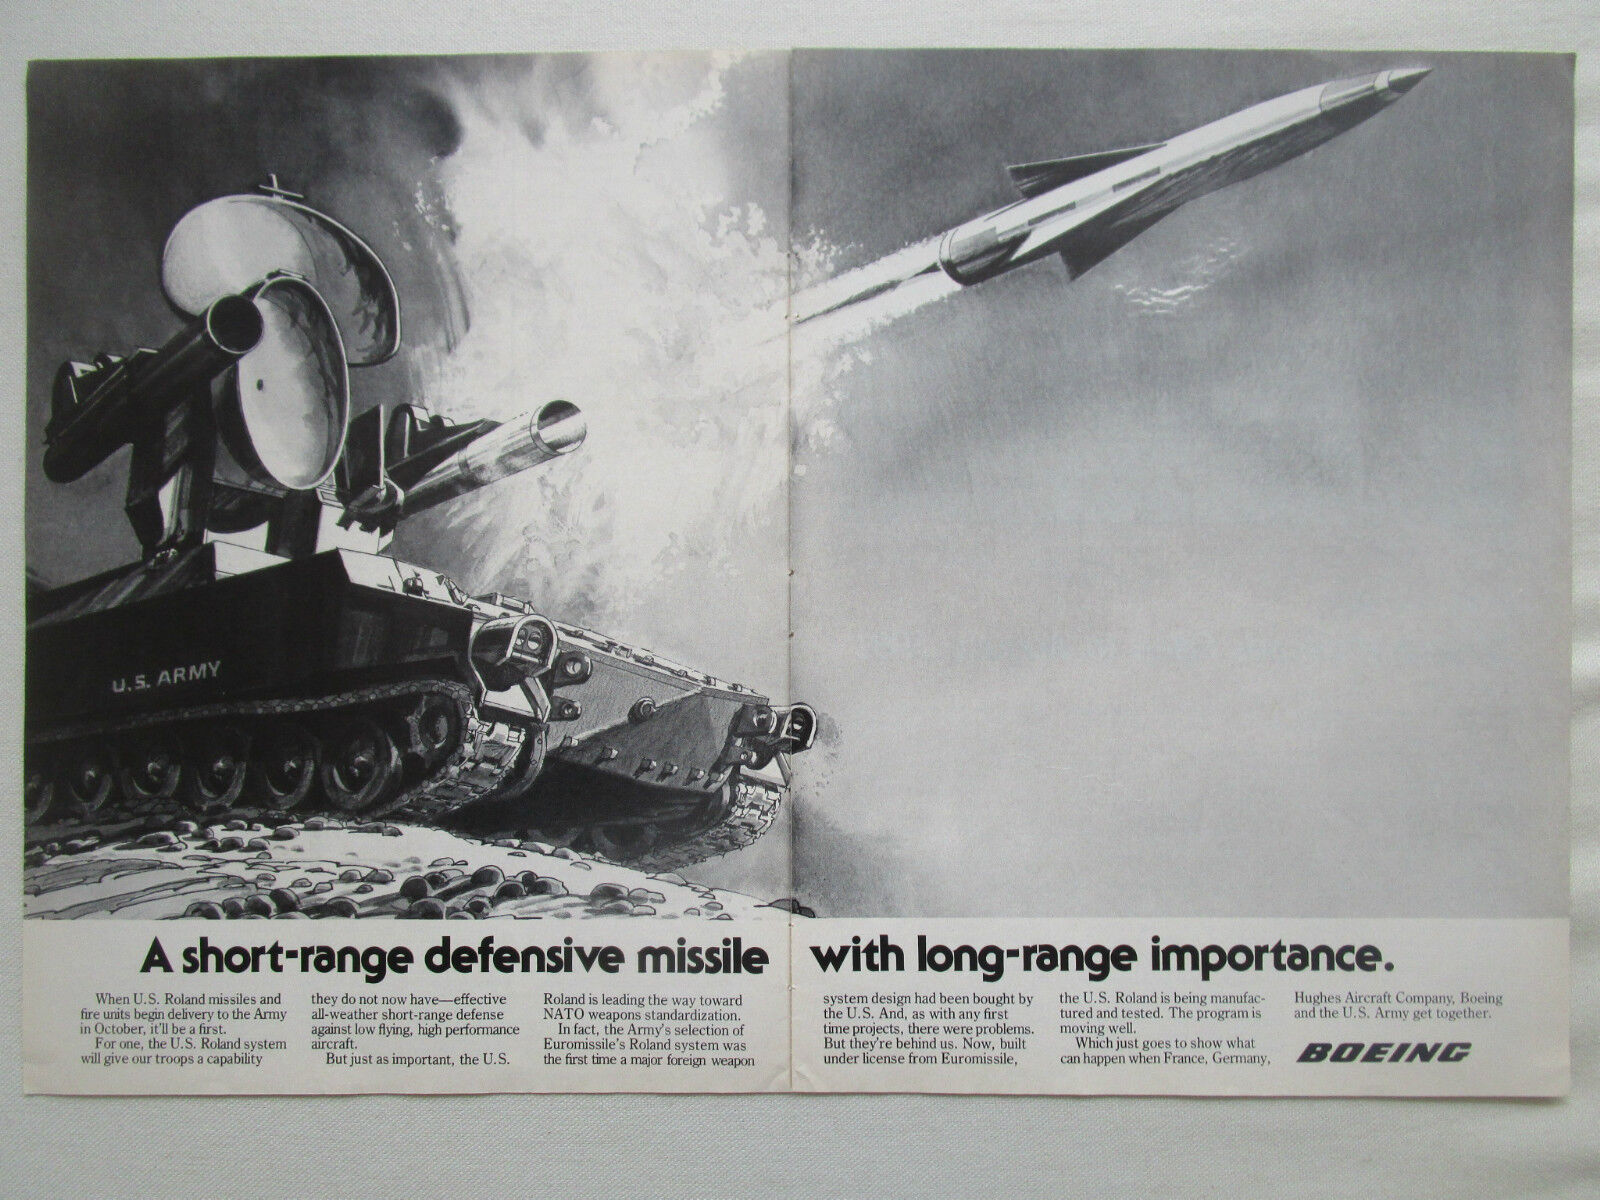 8/1977 PUB BOING US ARMY ROLAND ANTI AIRCRAFT MISSILE EUROMISSILE ORIGINAL AD